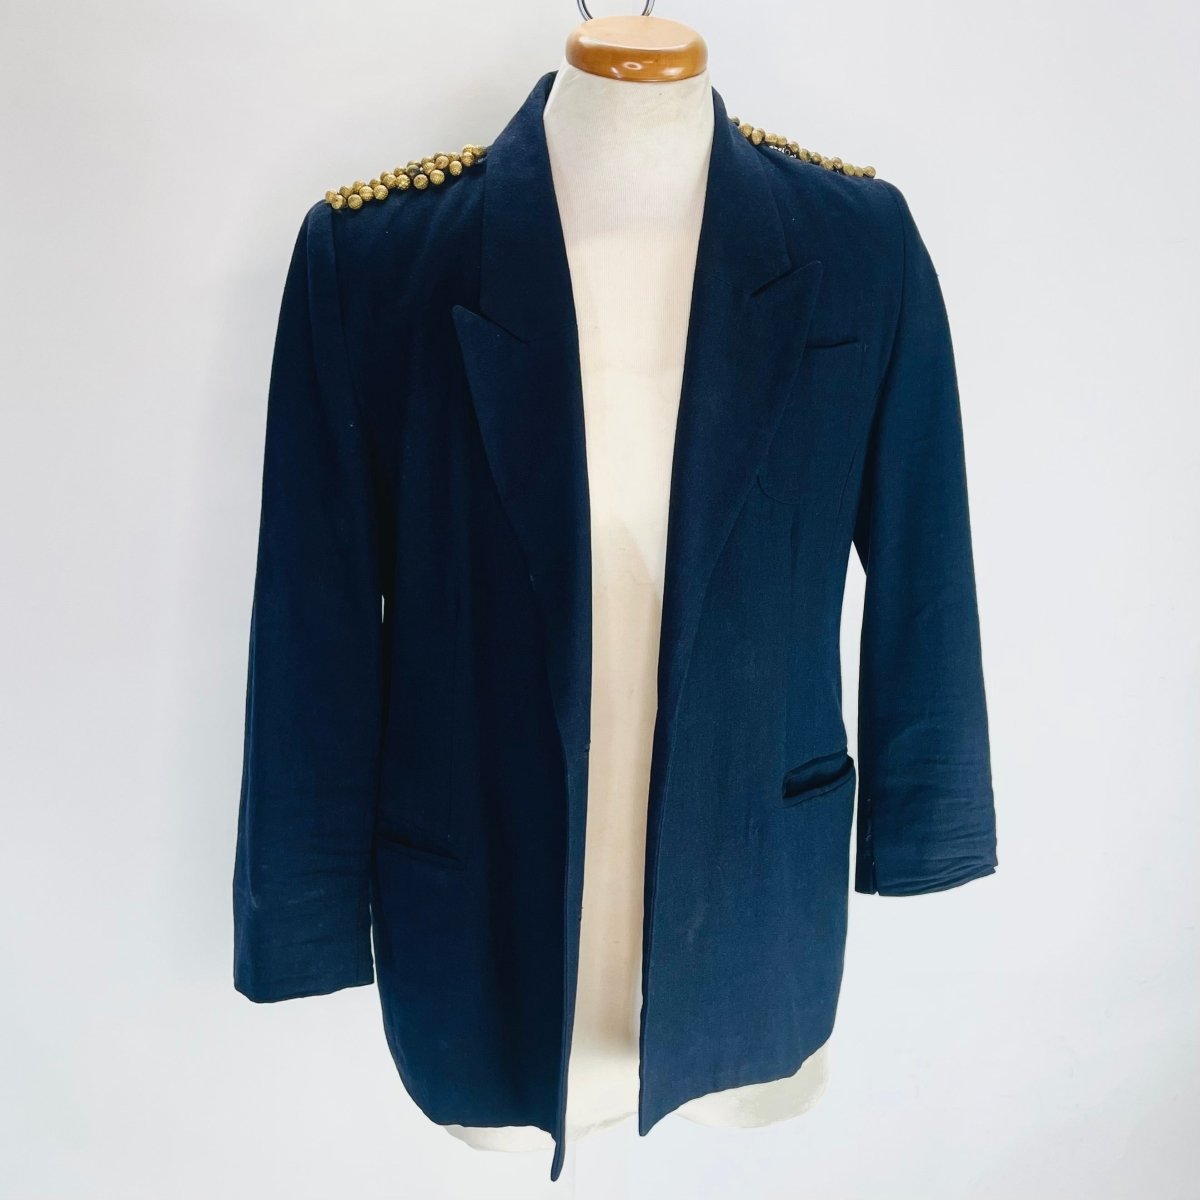 Navy Blue Blazer with Brass Bauble Epaulettes - Hart & Hive